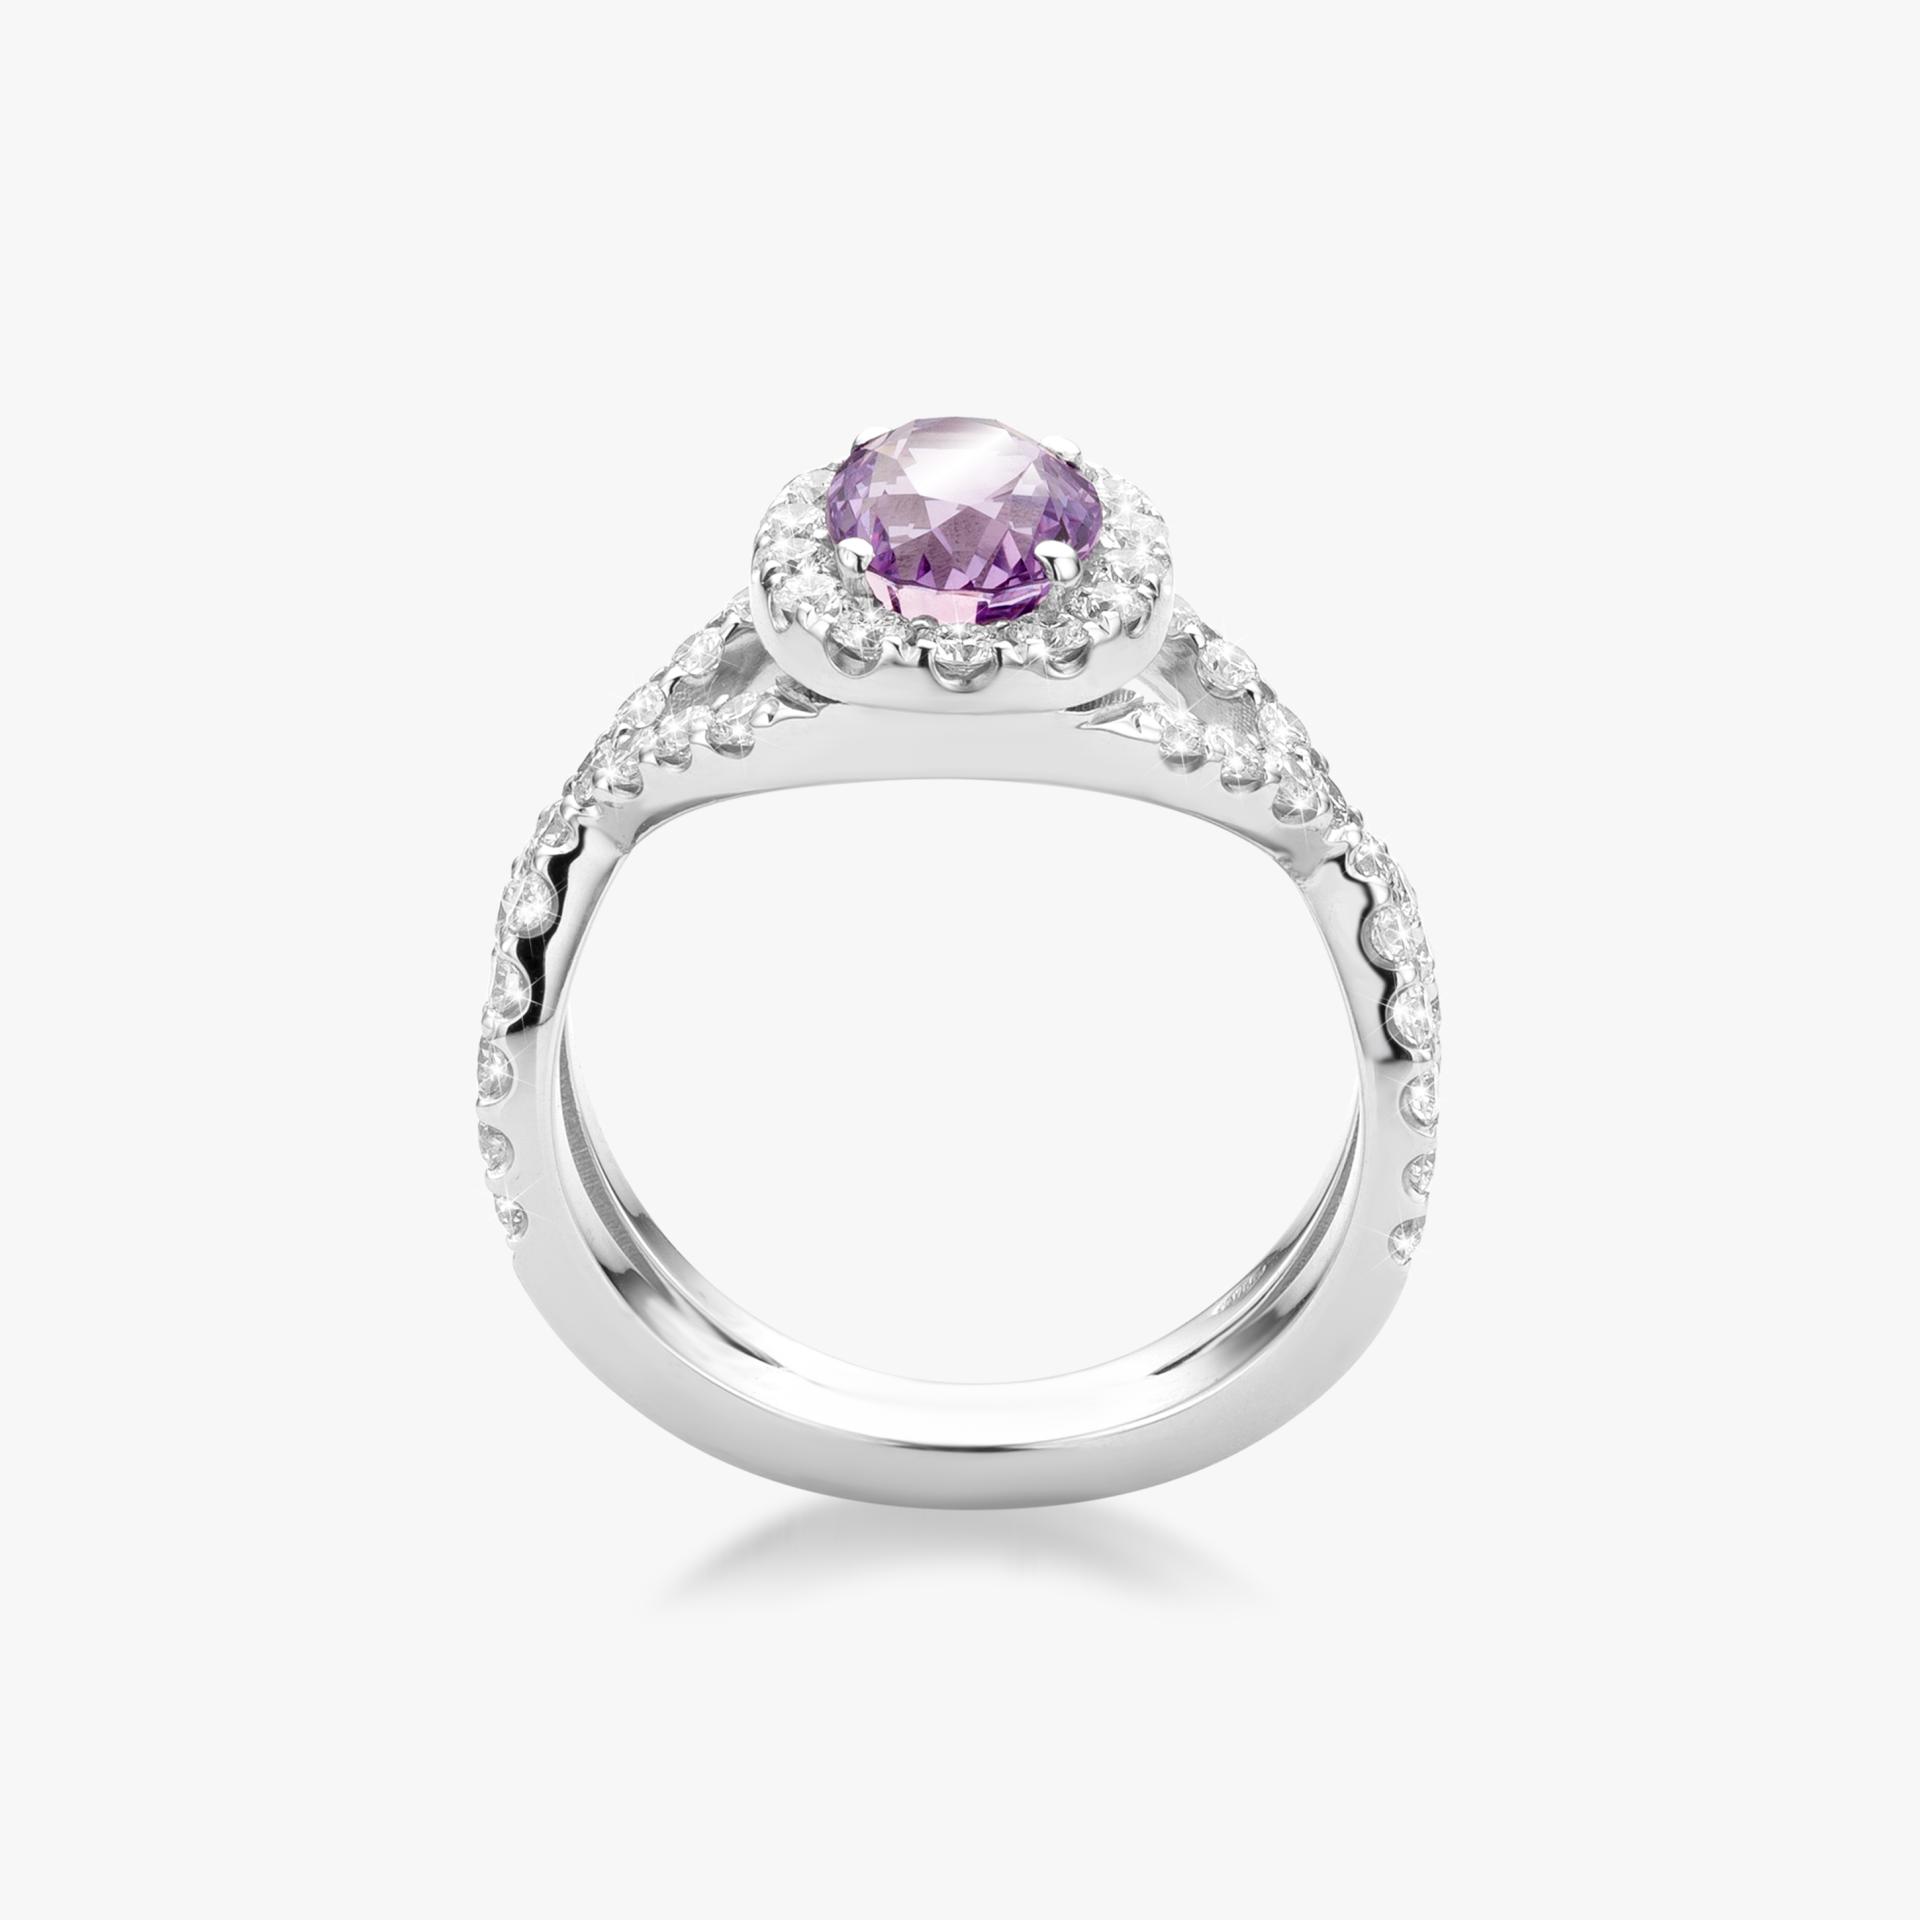 White gold ring set with rose sapphire and brilliant cut diamonds made by Maison De Greef